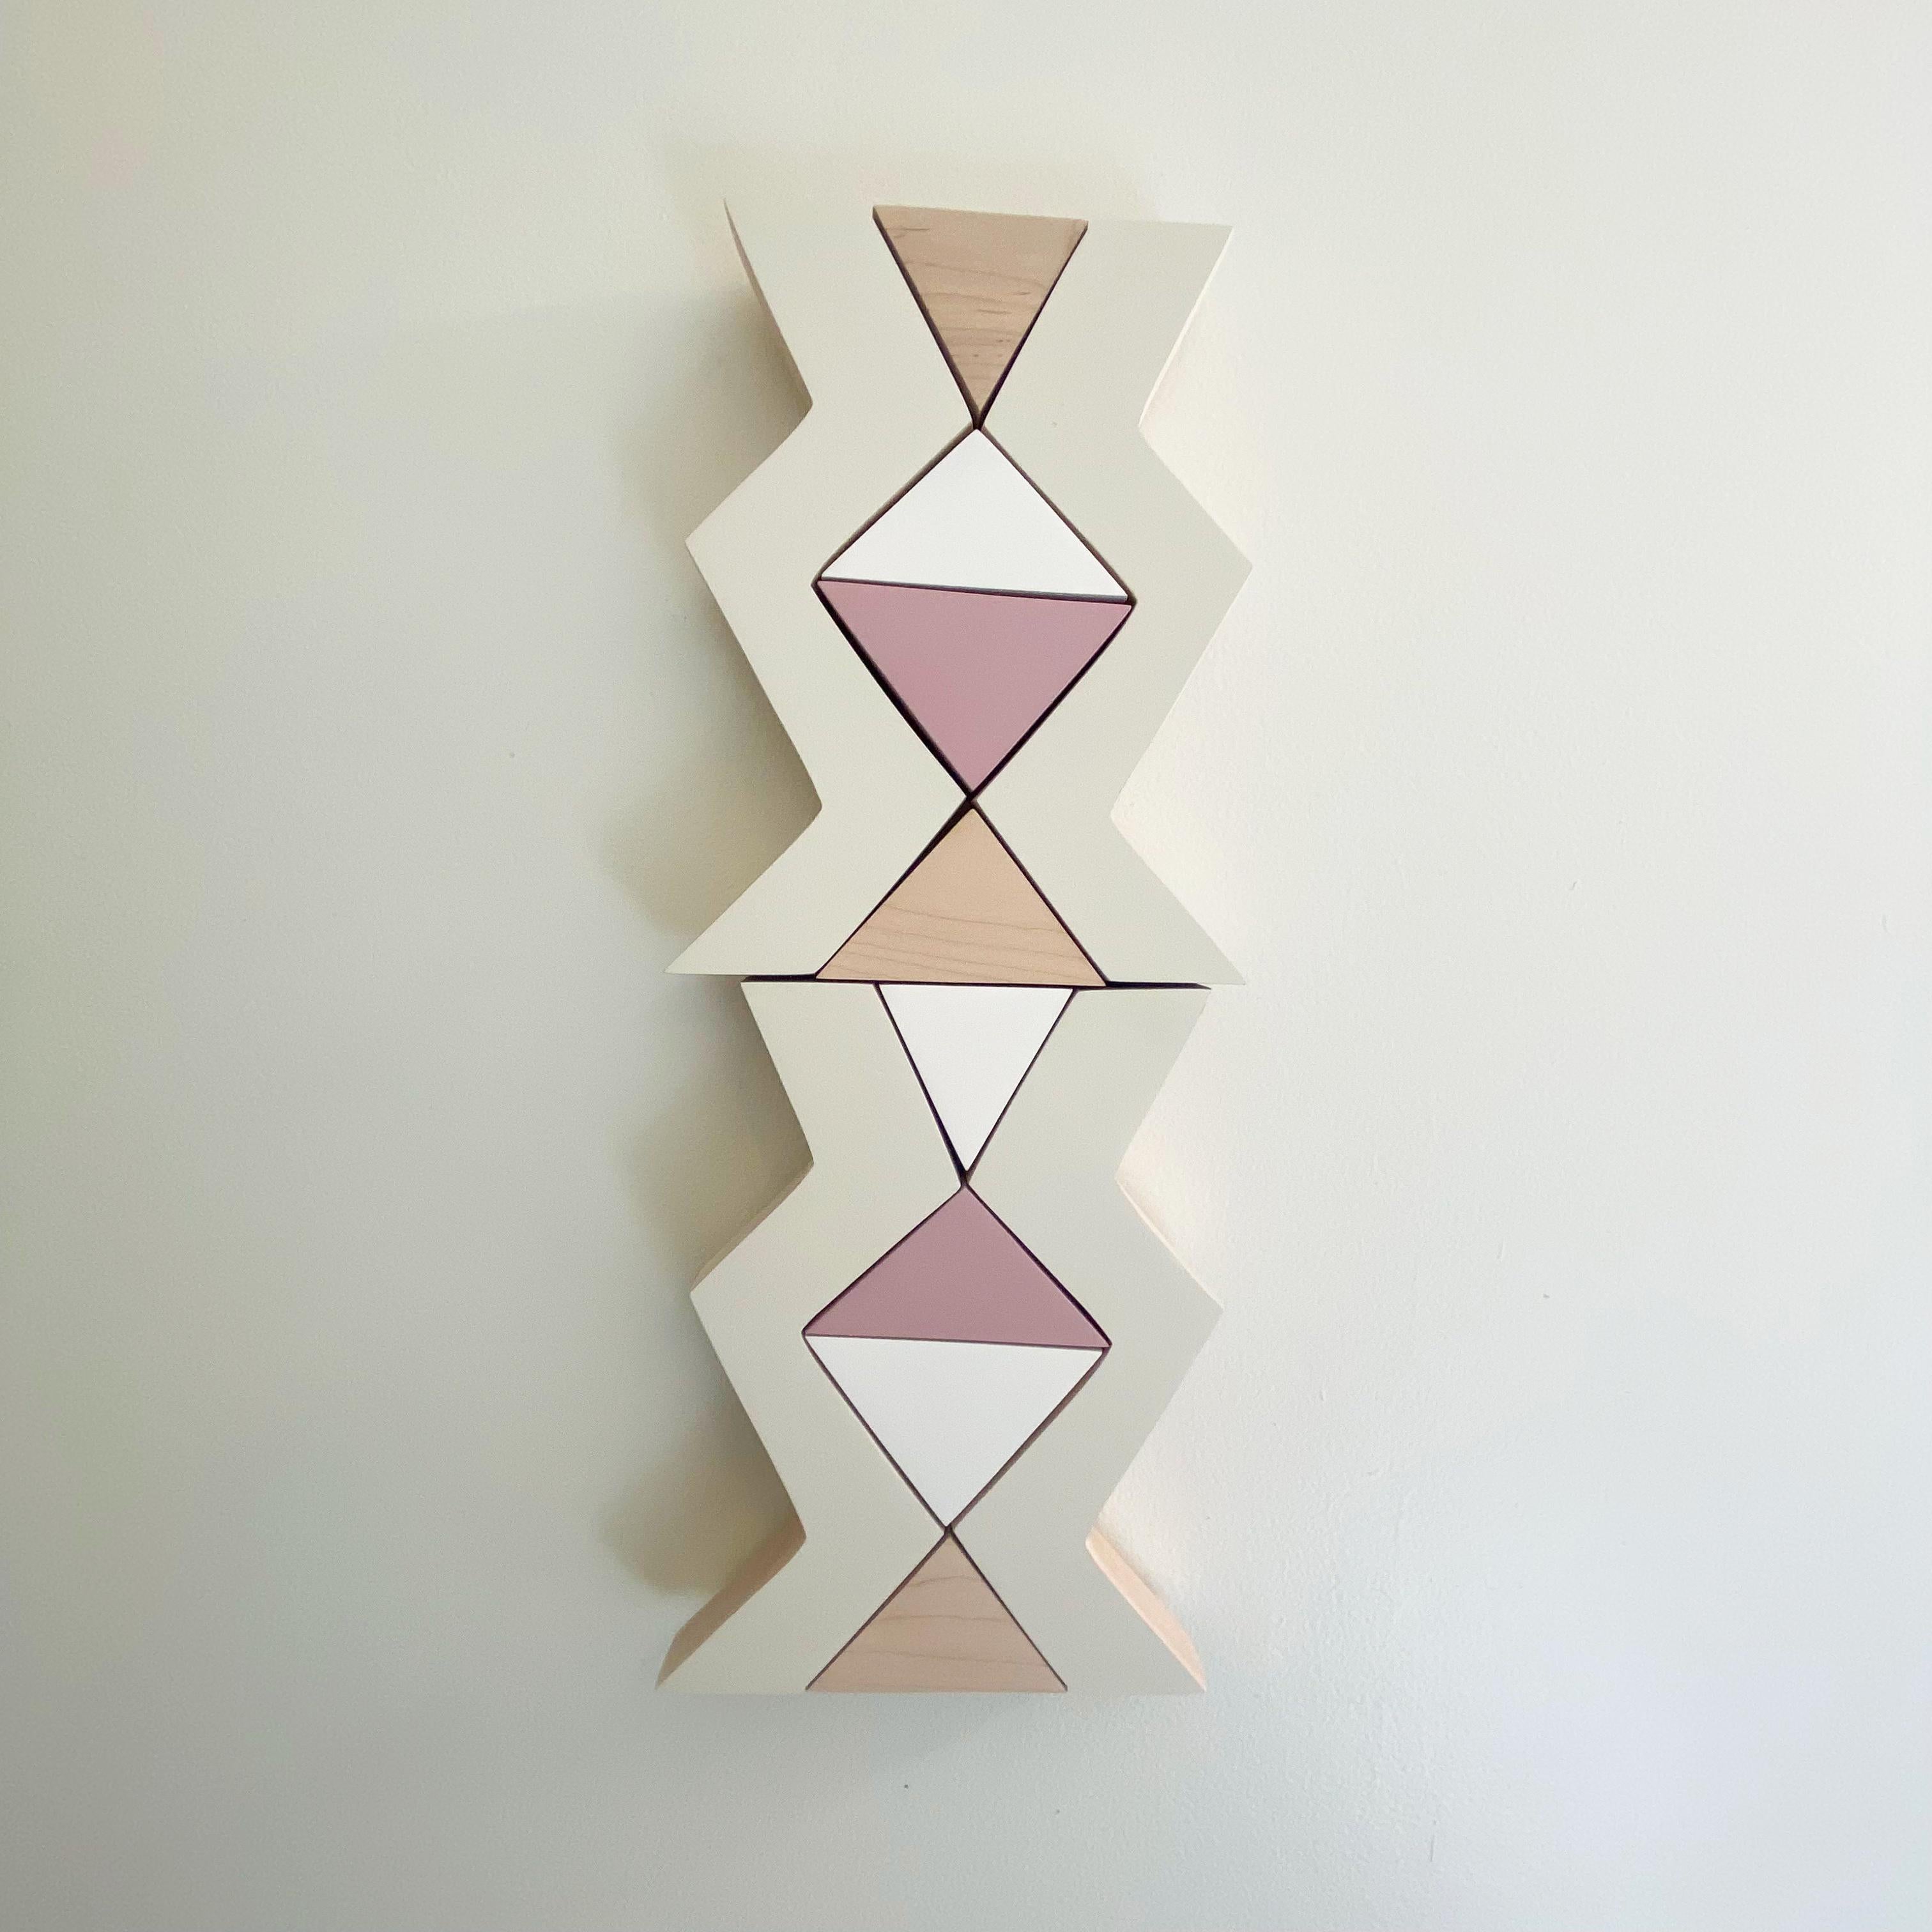 Artwork made by acrylic on solid maple, matte clear coat.

Small Pop series are minimalist driven, wood wall sculptures that are small and blocky and feature bright saturated colors. The pieces was inspired by my love for simple bold colors and